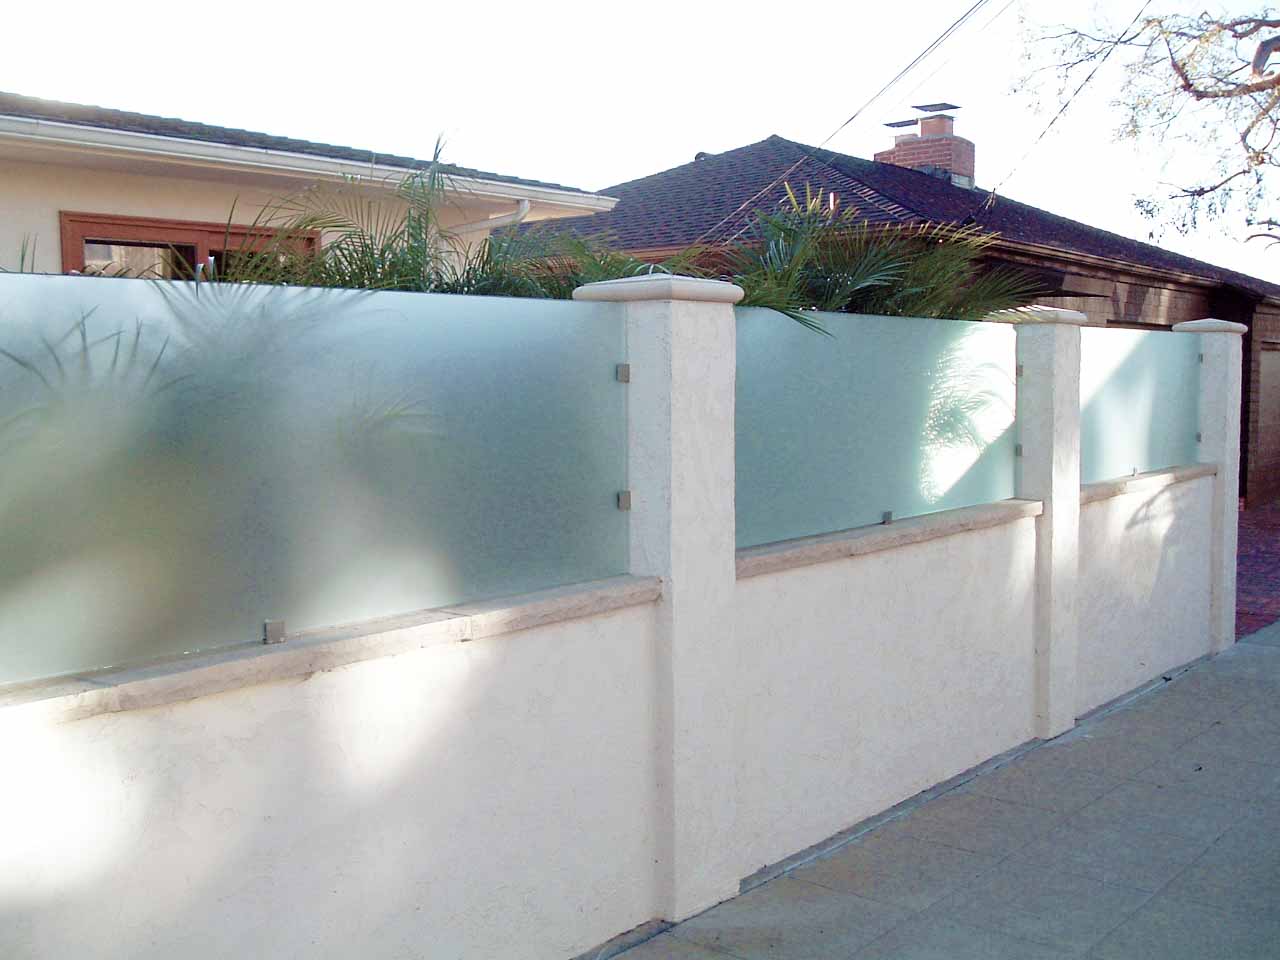 Outdoor glass railings over a concrete wall.